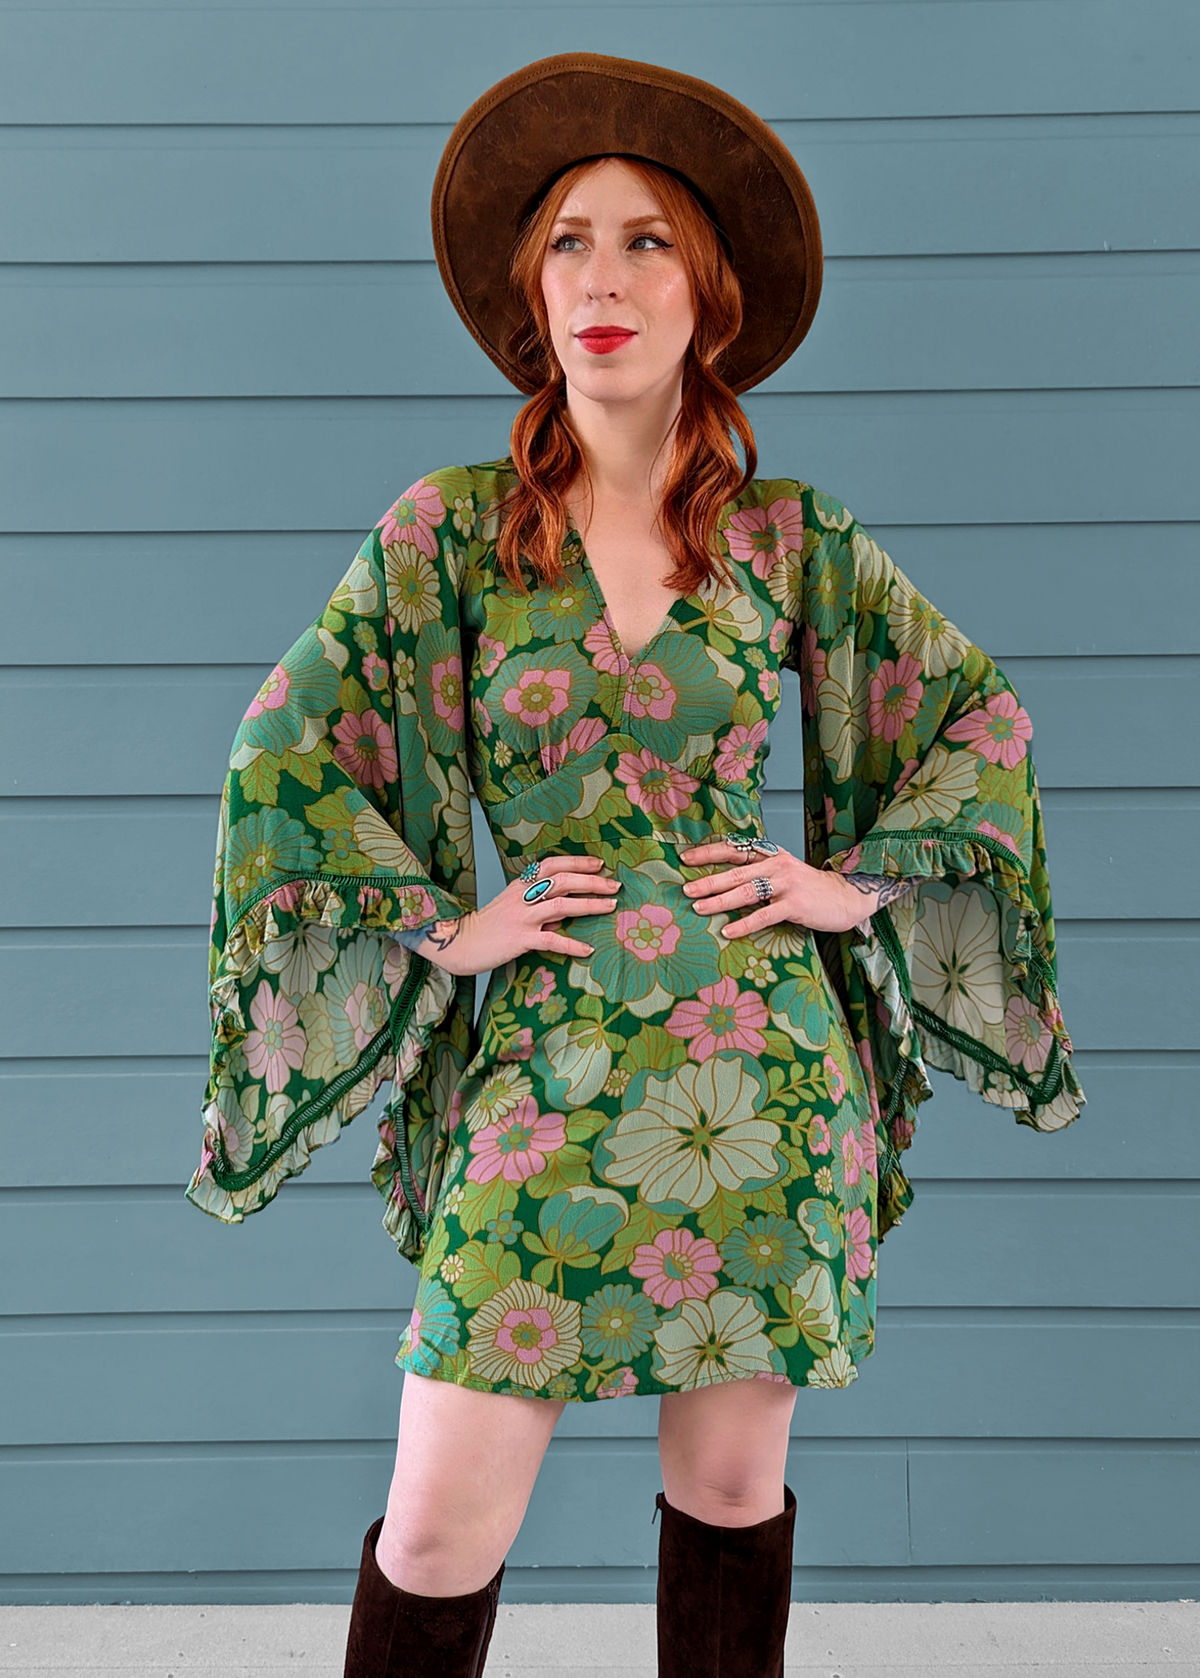 60s 70s inspired Angel Bell Sleeve Vixen Mini Dress in Arcadia green and pink floral by Nine Lives Bazaar